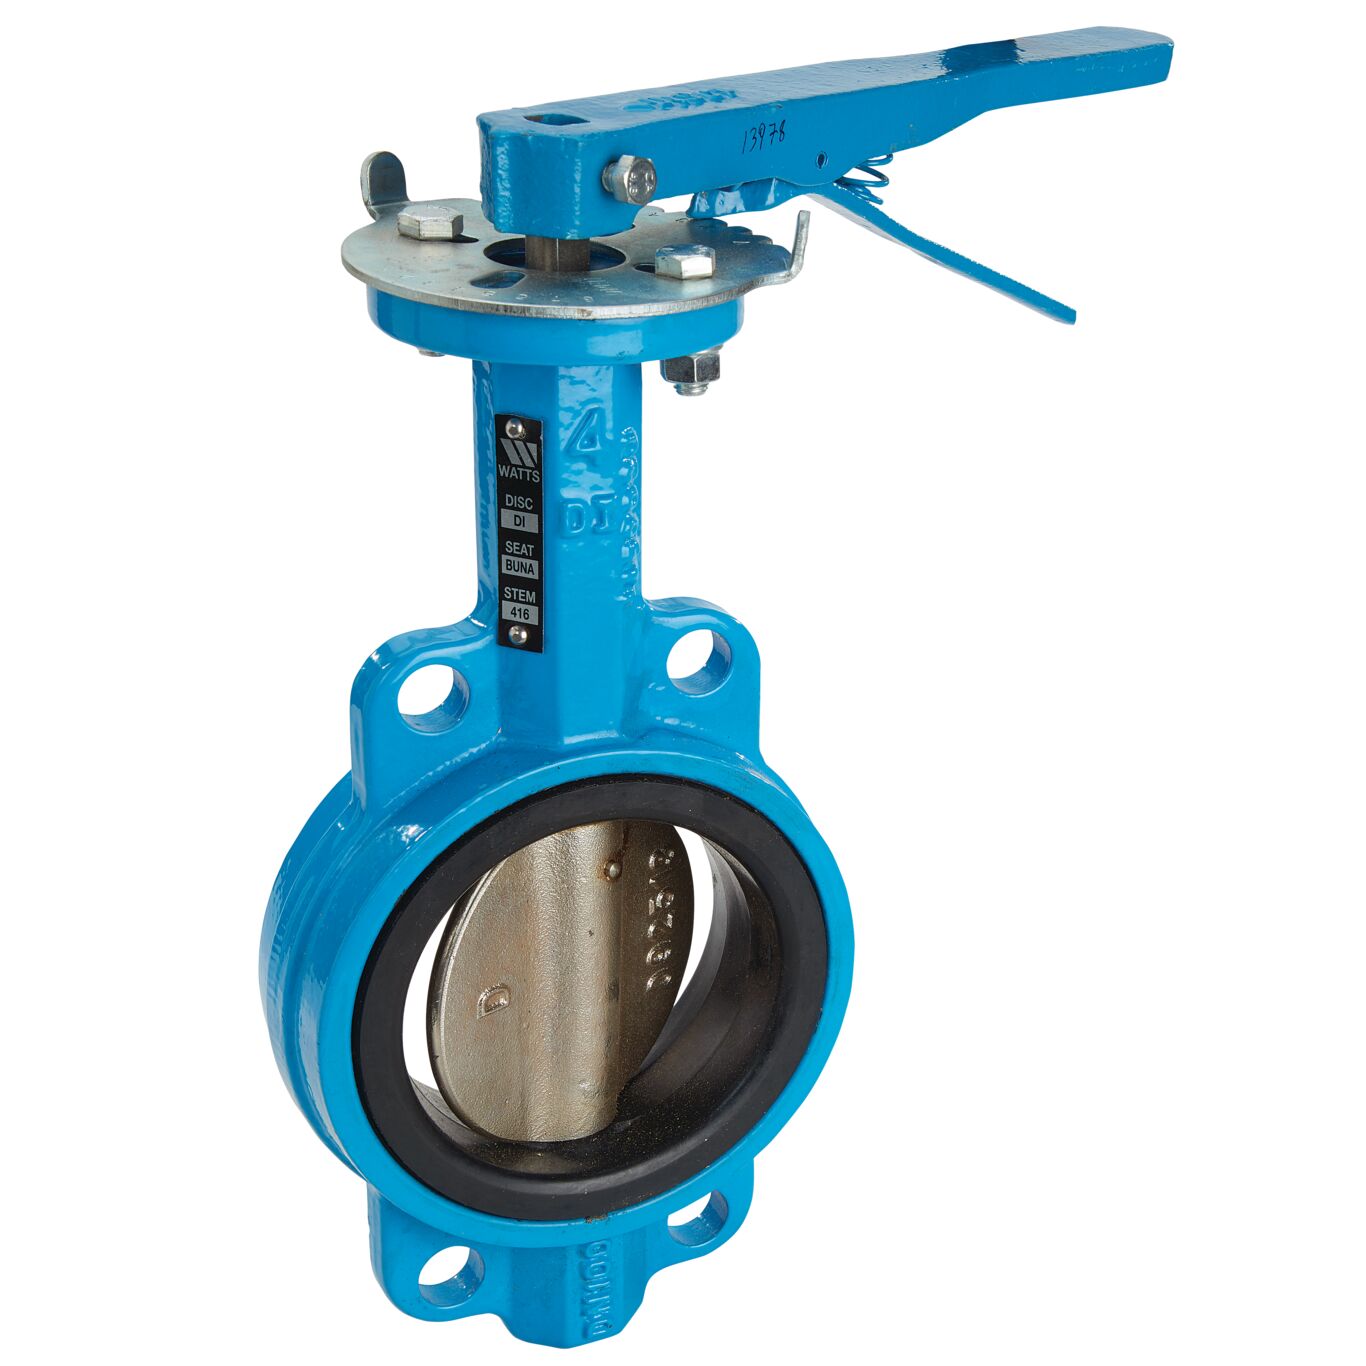 Product Image - Butterfly Valve, Wafer, Ductile Iron Body, Ductile Iron Disc, 416 Ss Shaft, Buna-N Seat, Lever Handle